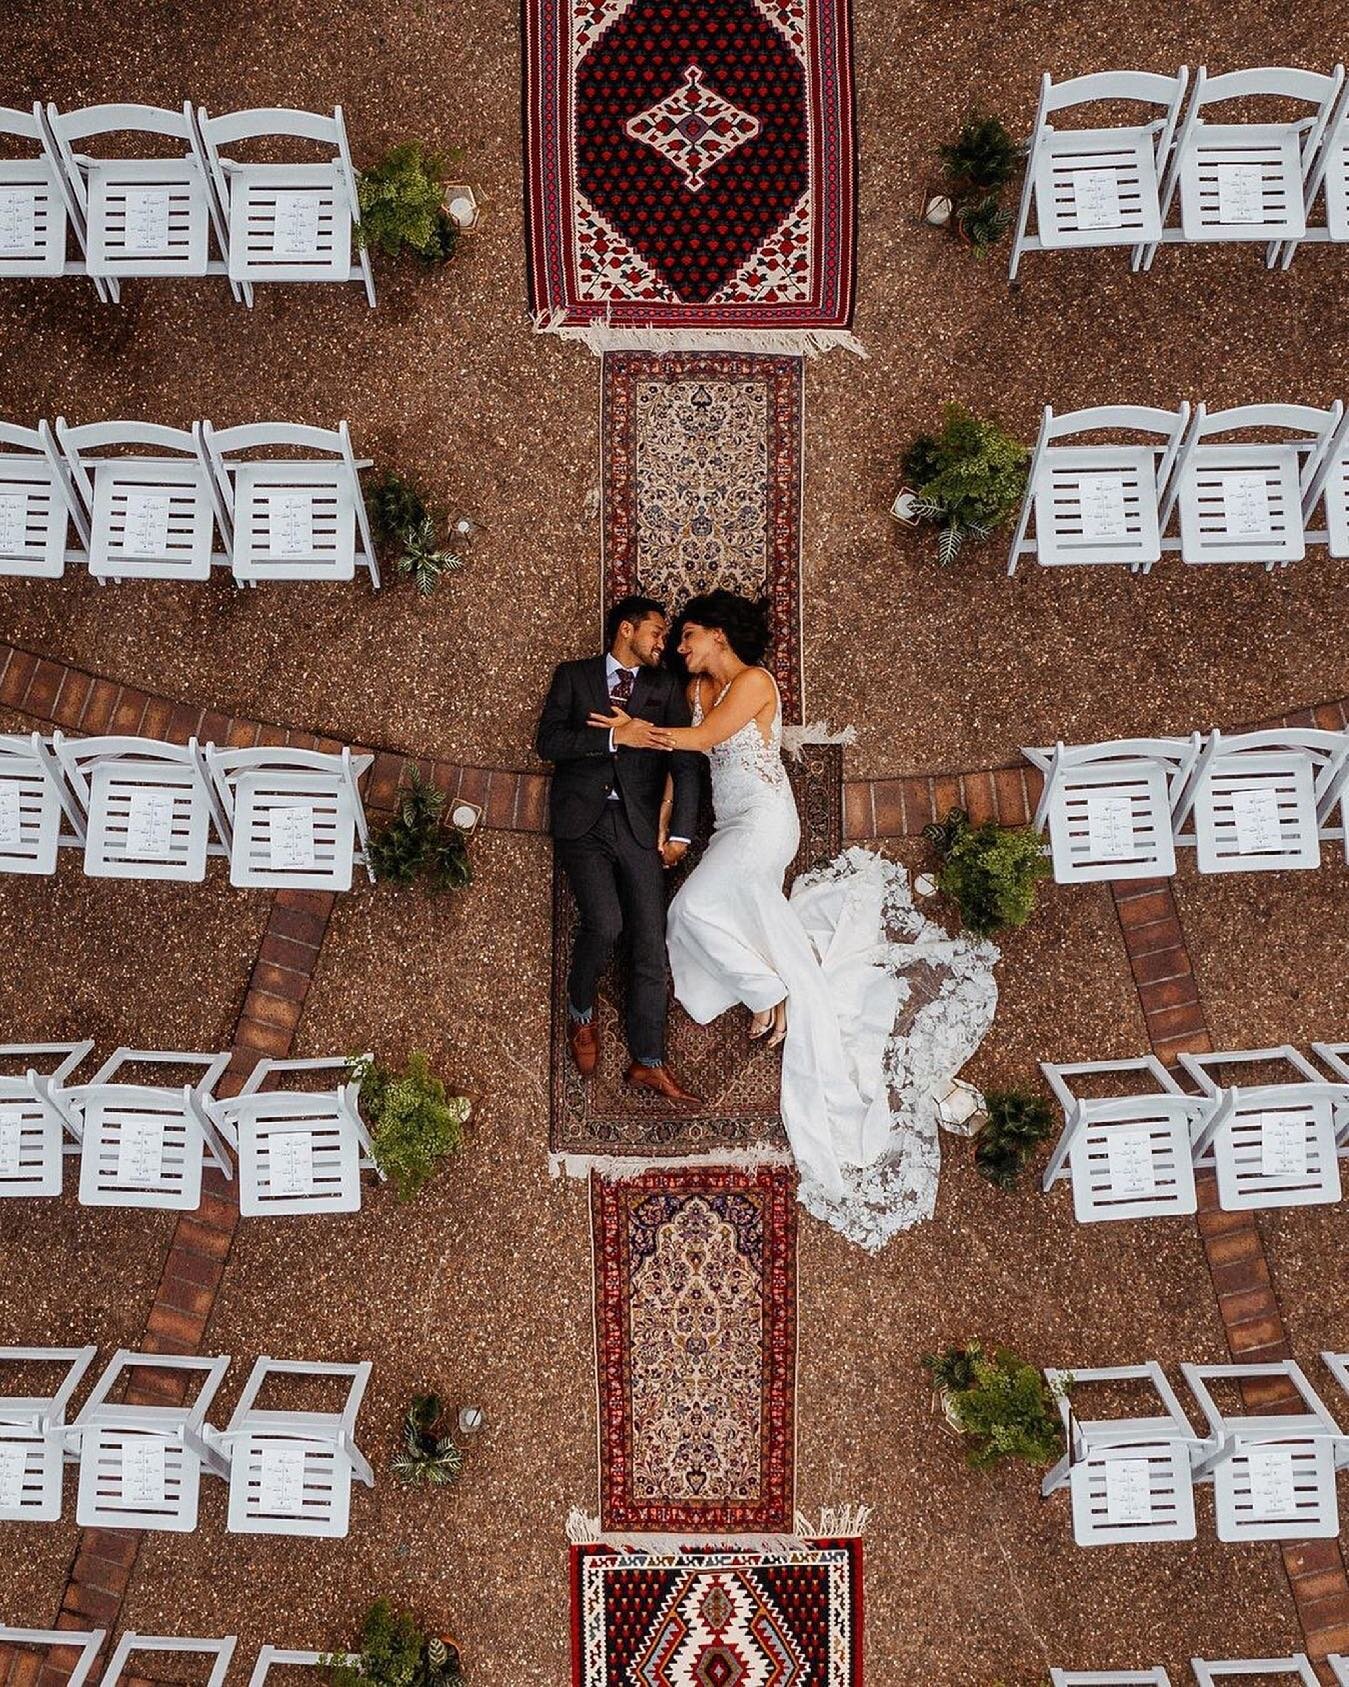 I know its only Wednesday but its time to slow down and enjoy the moment!  A drone shot is ALWAYS a great idea! 
&bull;
Edited using @wkpresets⚡️
&mdash;
Vendors: 
Photography: @willkhouryphotography
Wedding Planner: @aroosibylili
Videography: @envyy